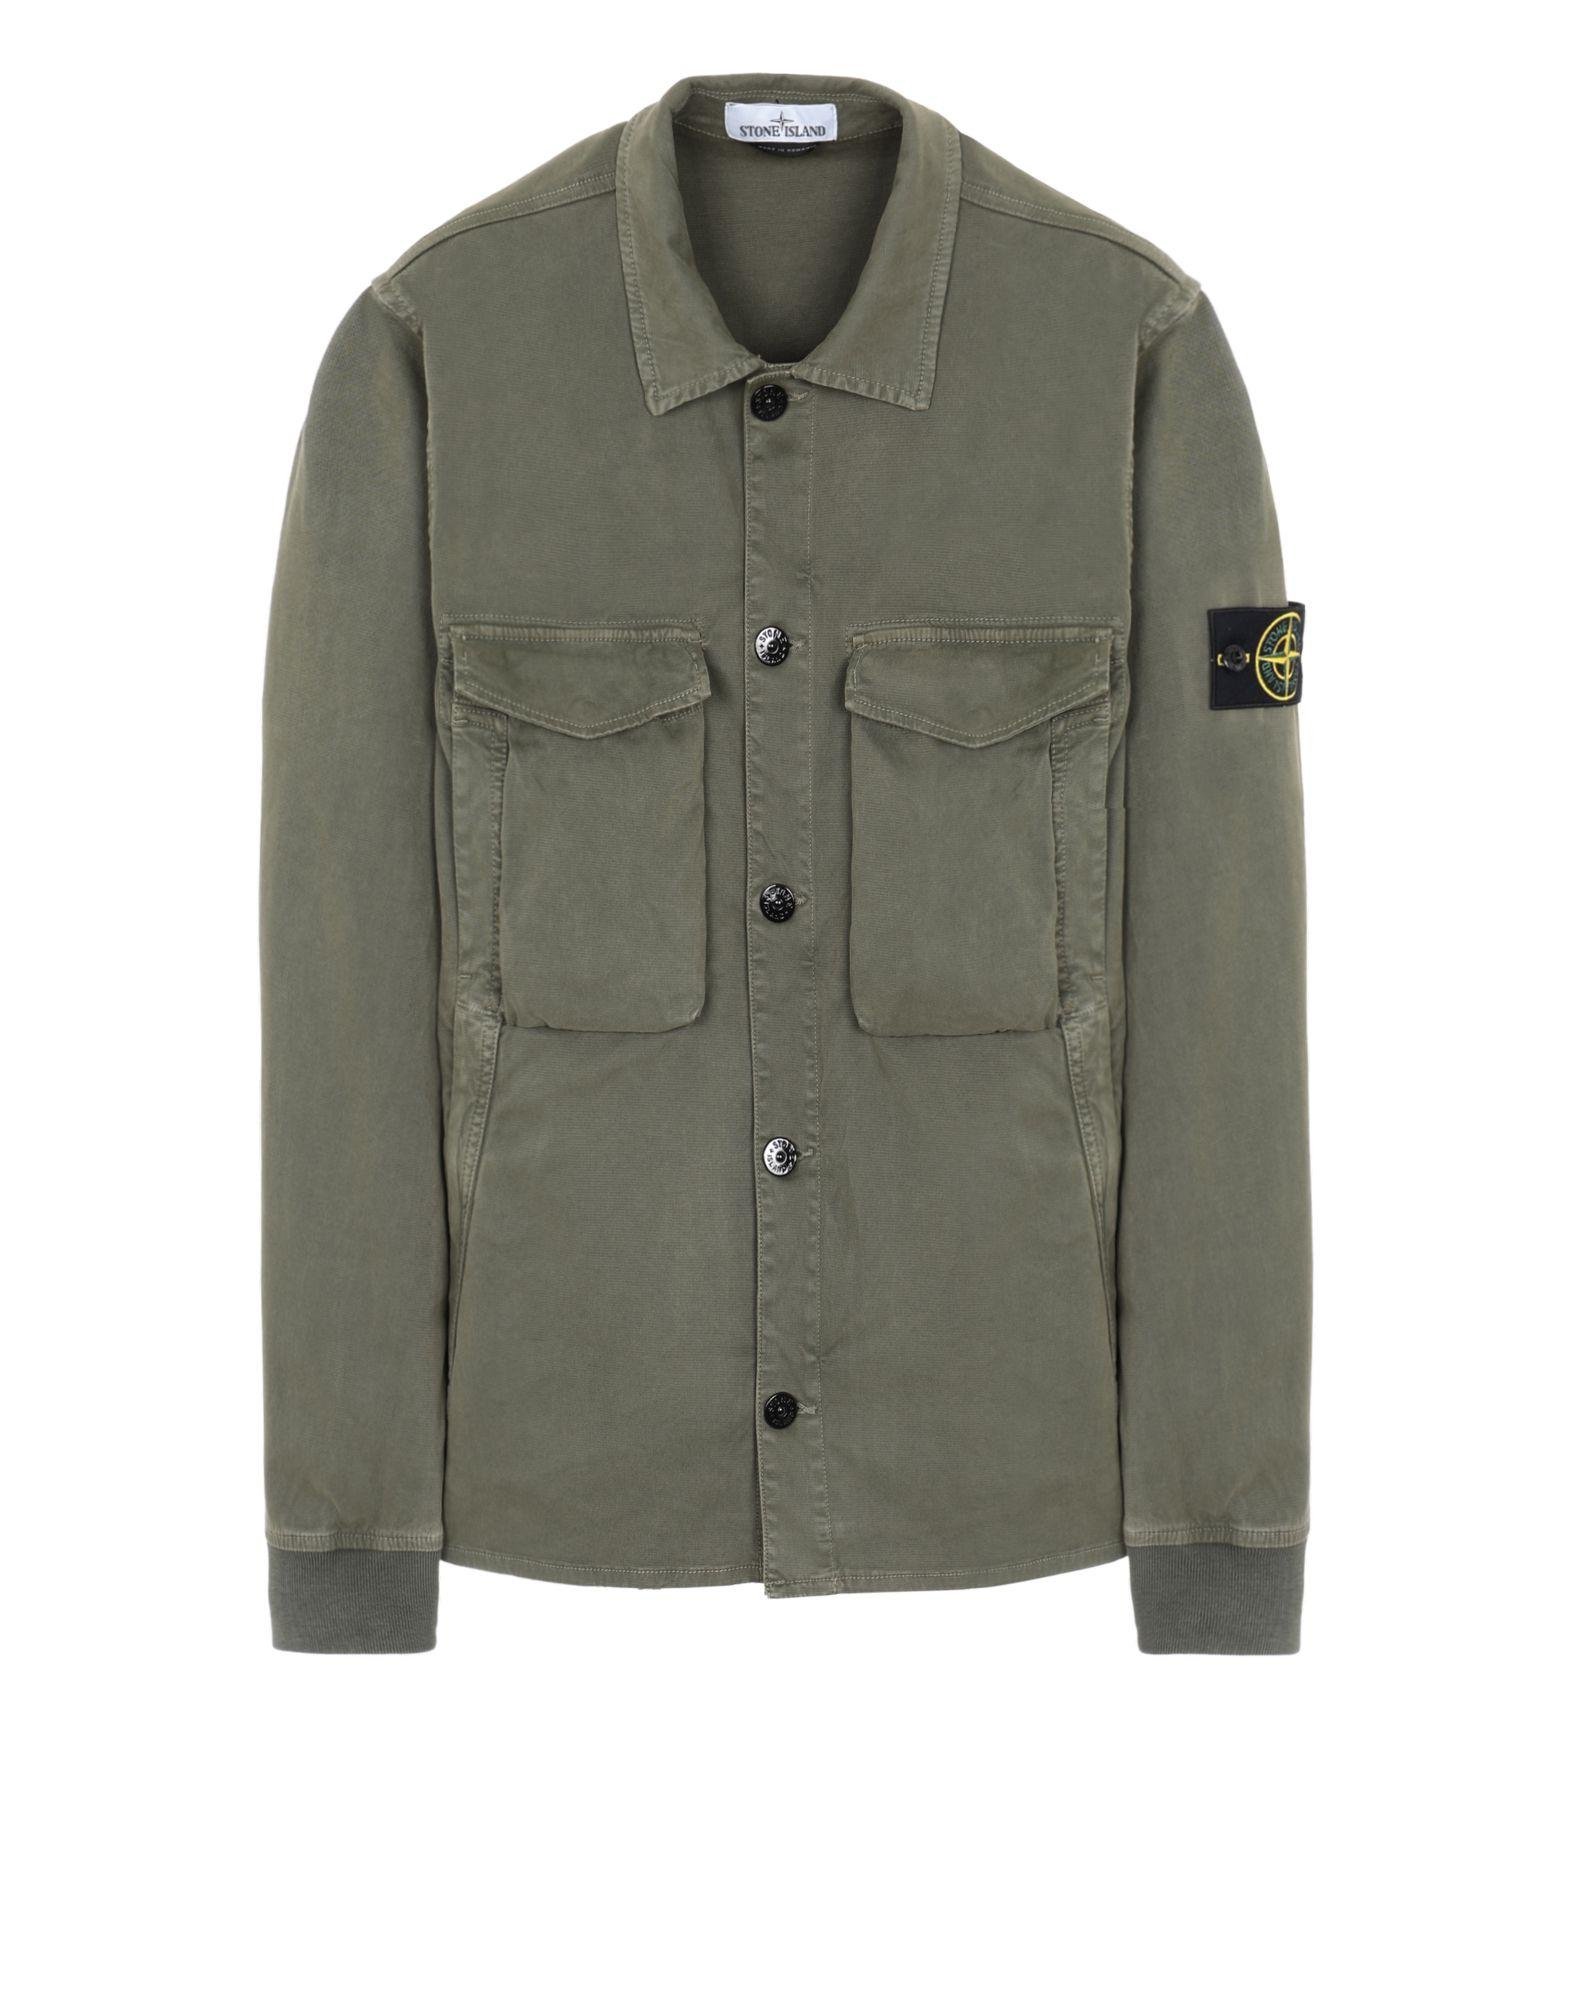 Stone Island Cotton 13002 'old' Dye Treatment in Olive Green (Green ...